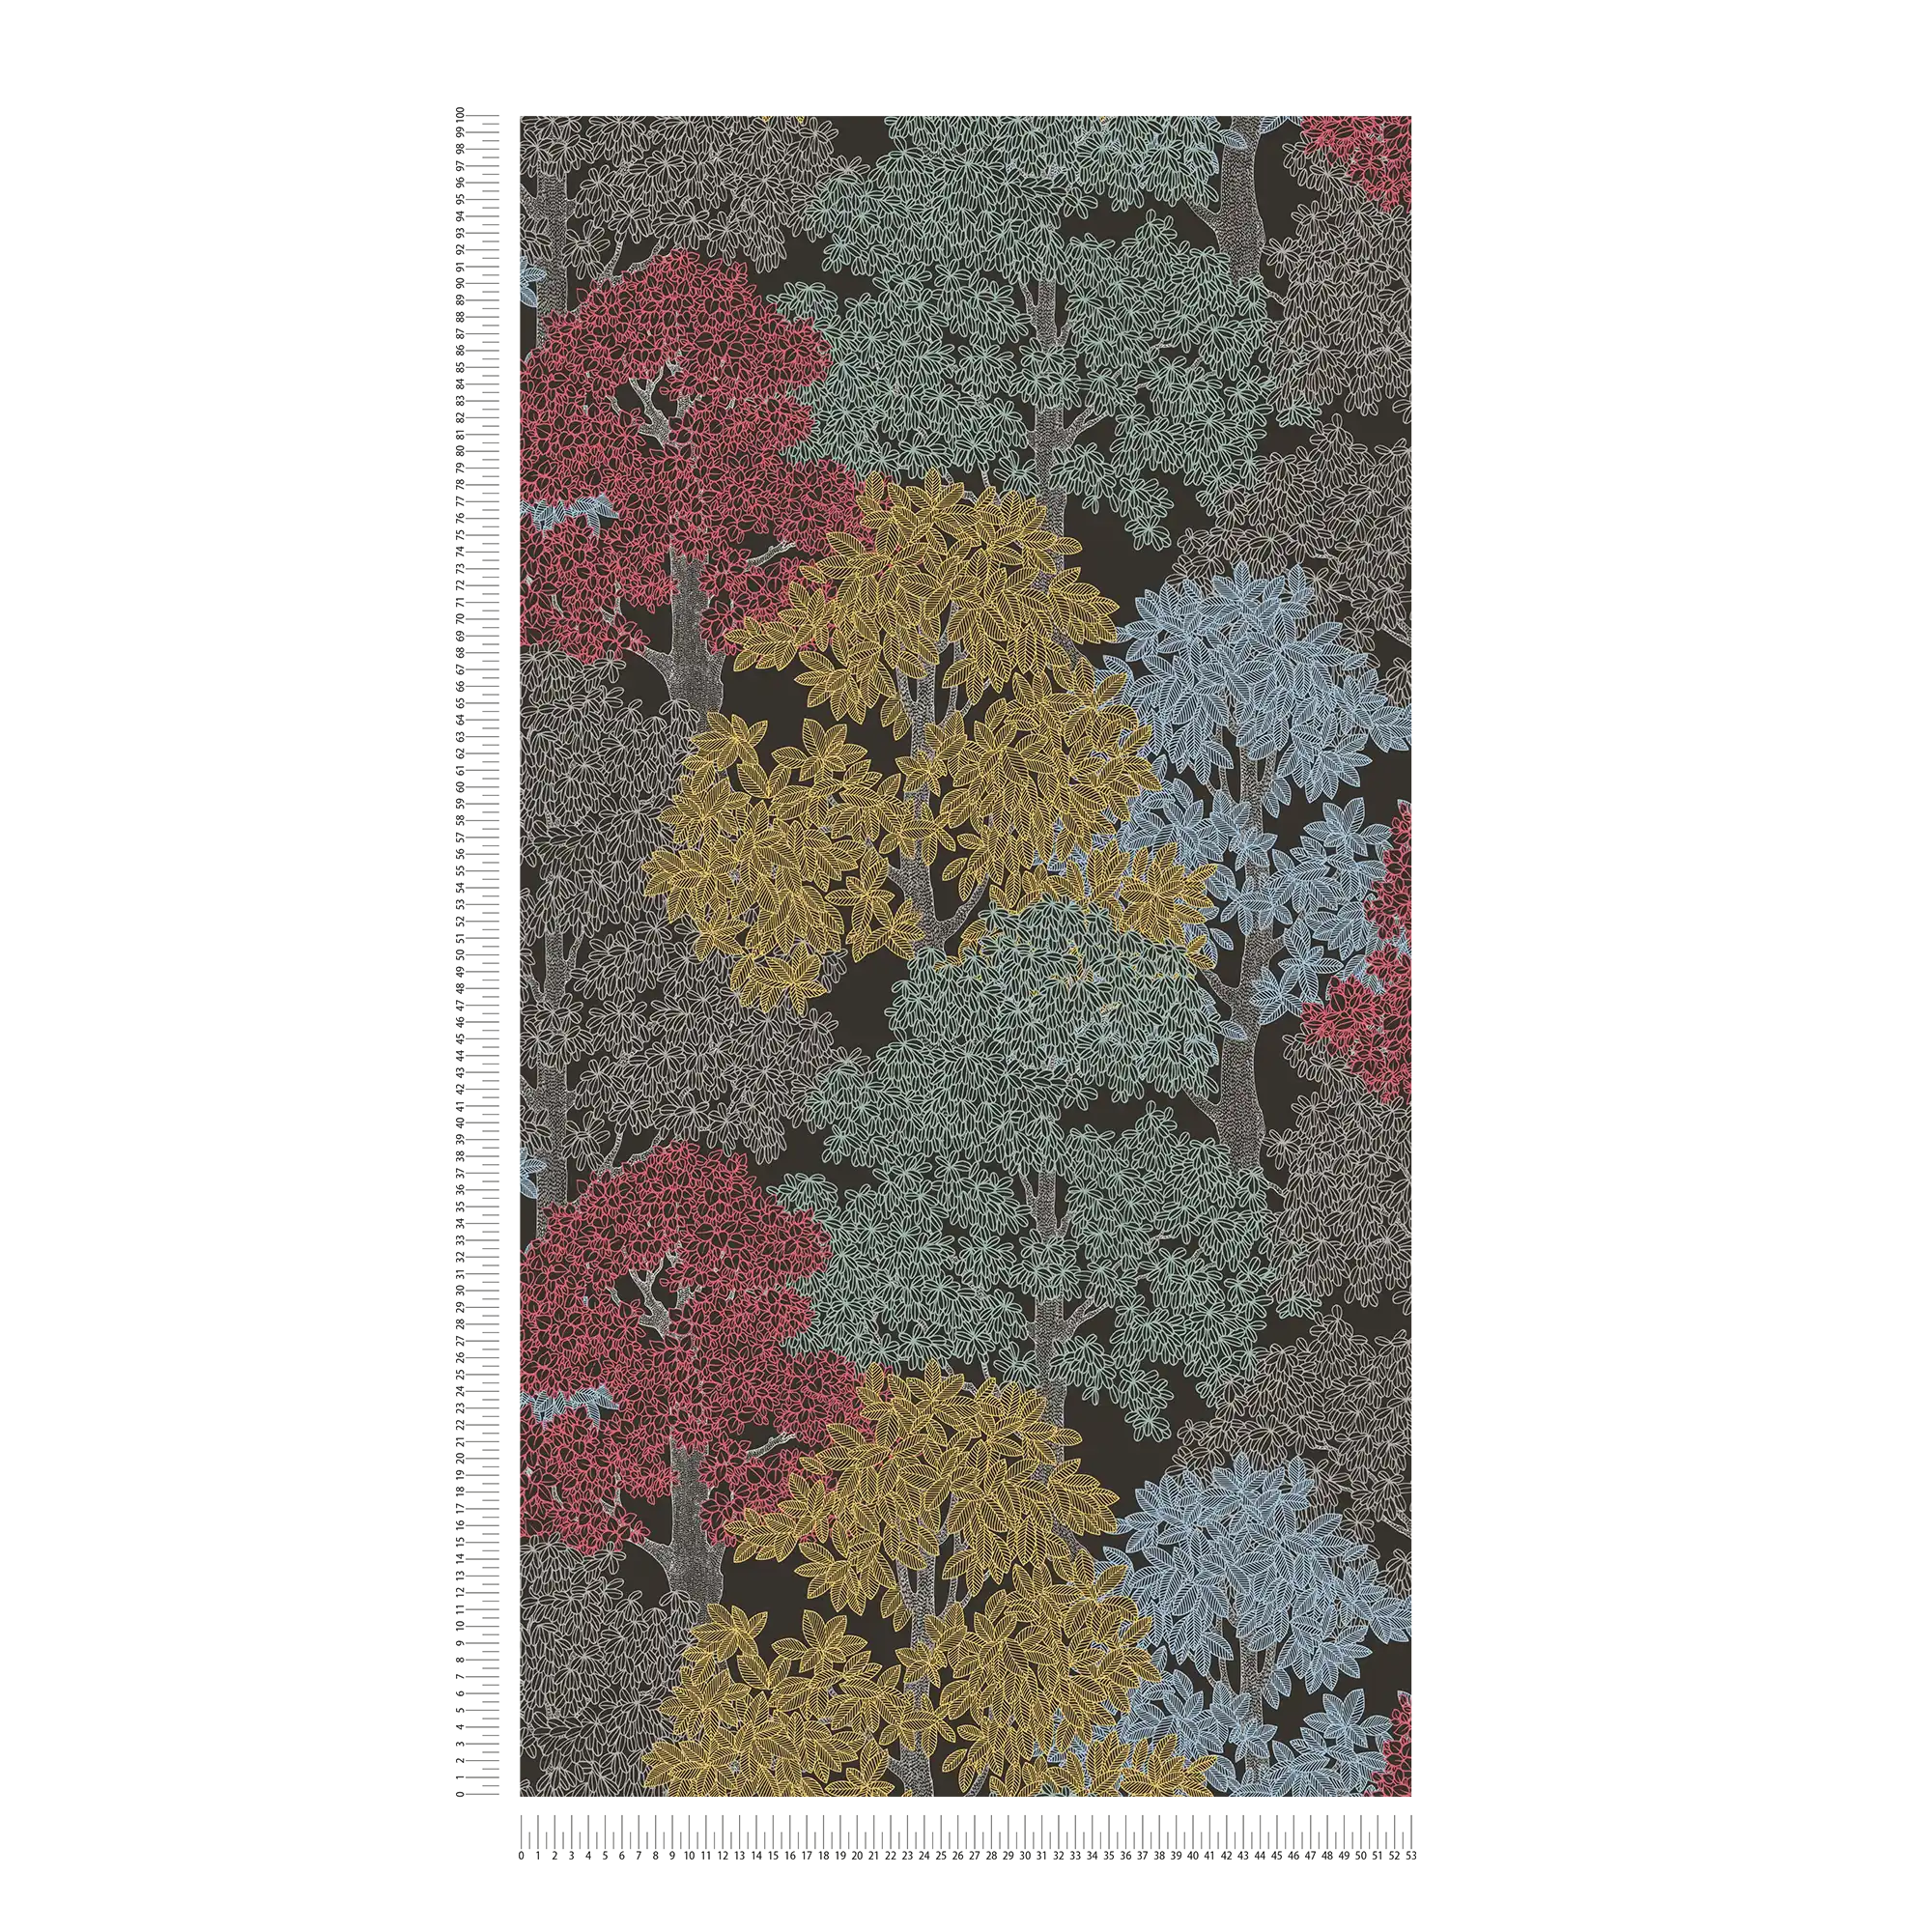             Wallpaper forest design in drawing style with treetops - brown, black, yellow
        